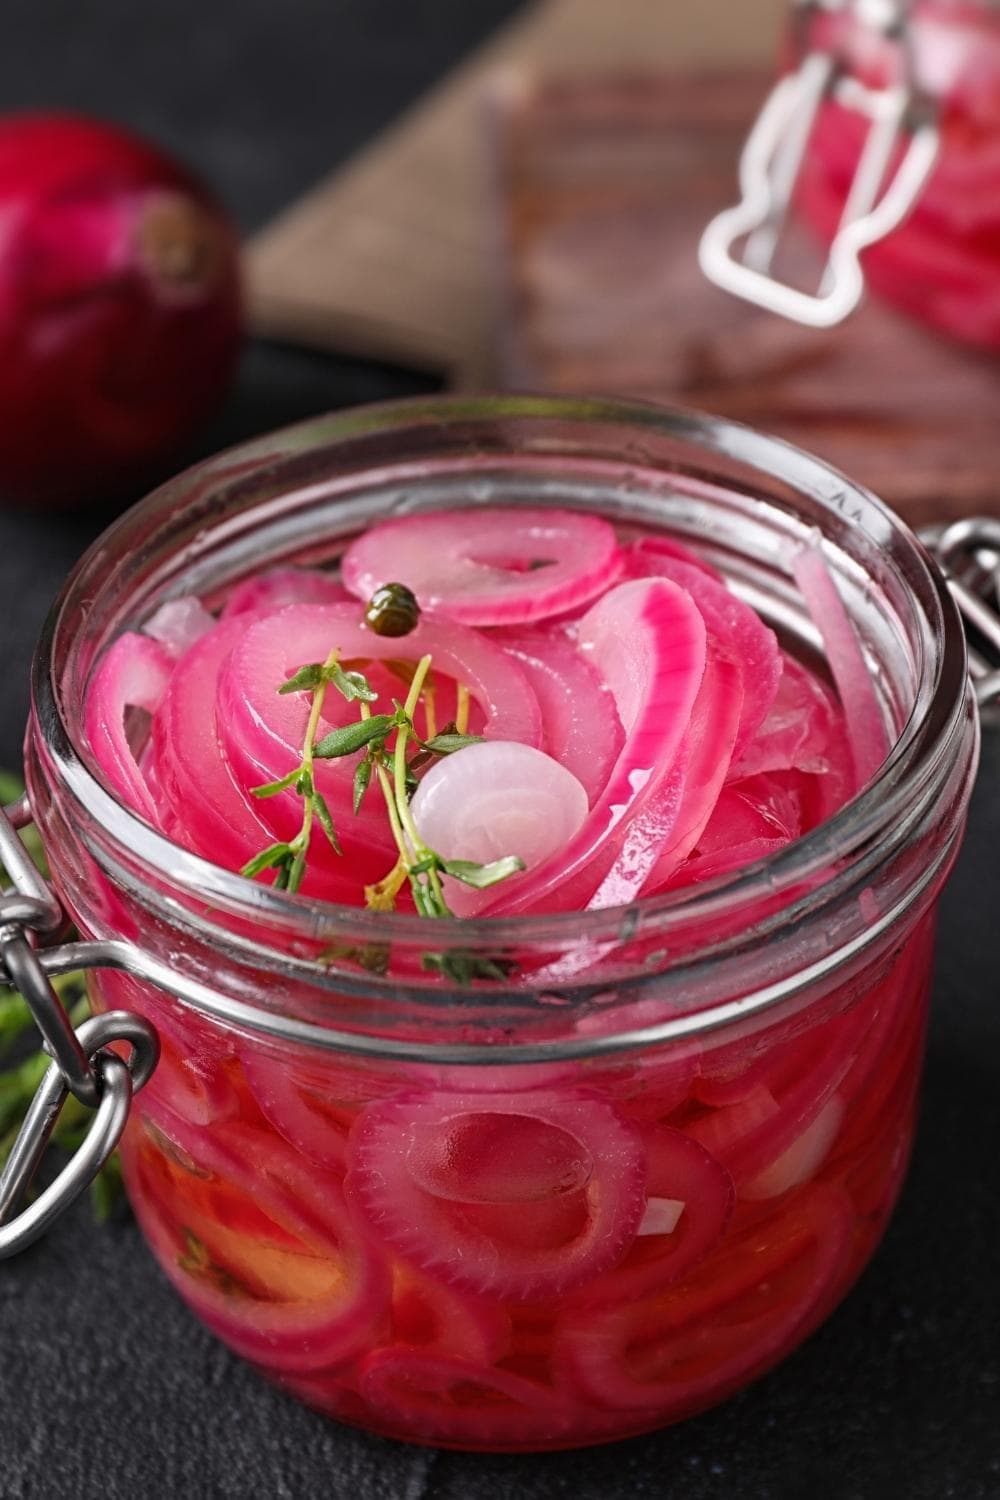 25 Red Onion Recipes From Sides to Salads - Insanely Good